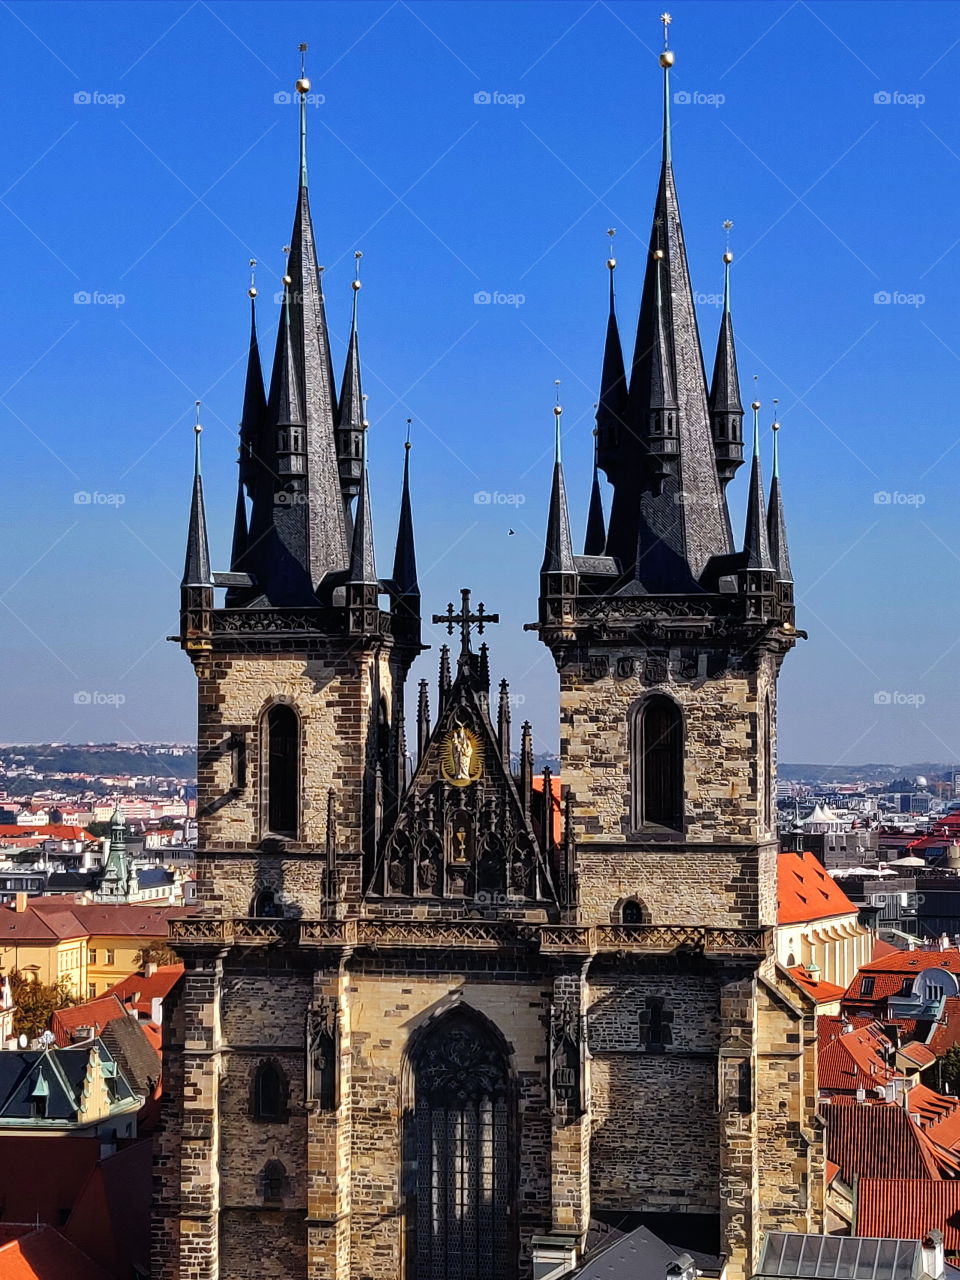 The temple from the tower with spiers in the old town of Prague